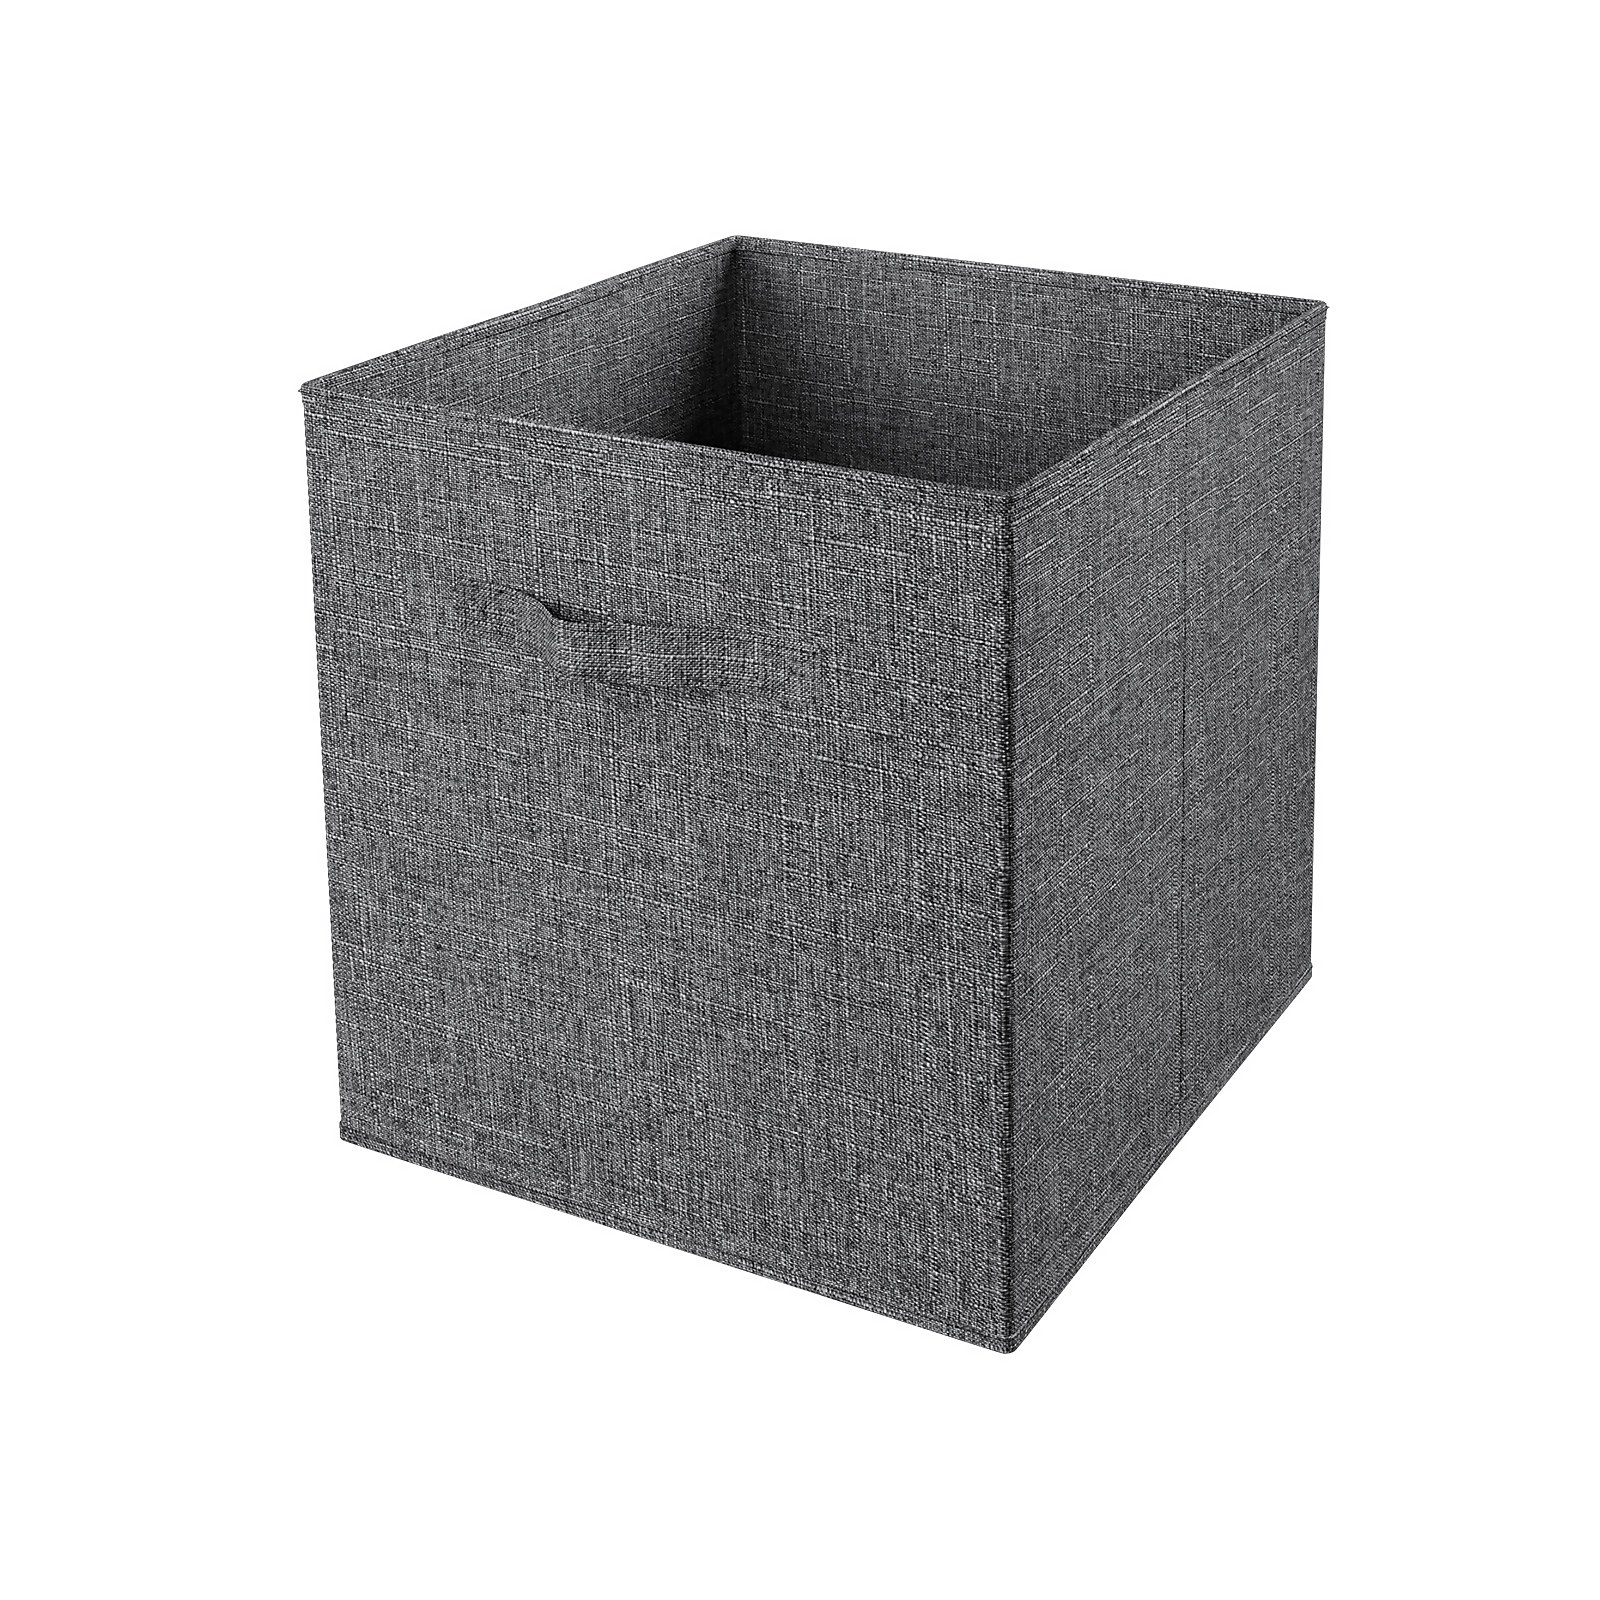 Photo of Living Elements Compact Cube Premium Woven Insert - Silver